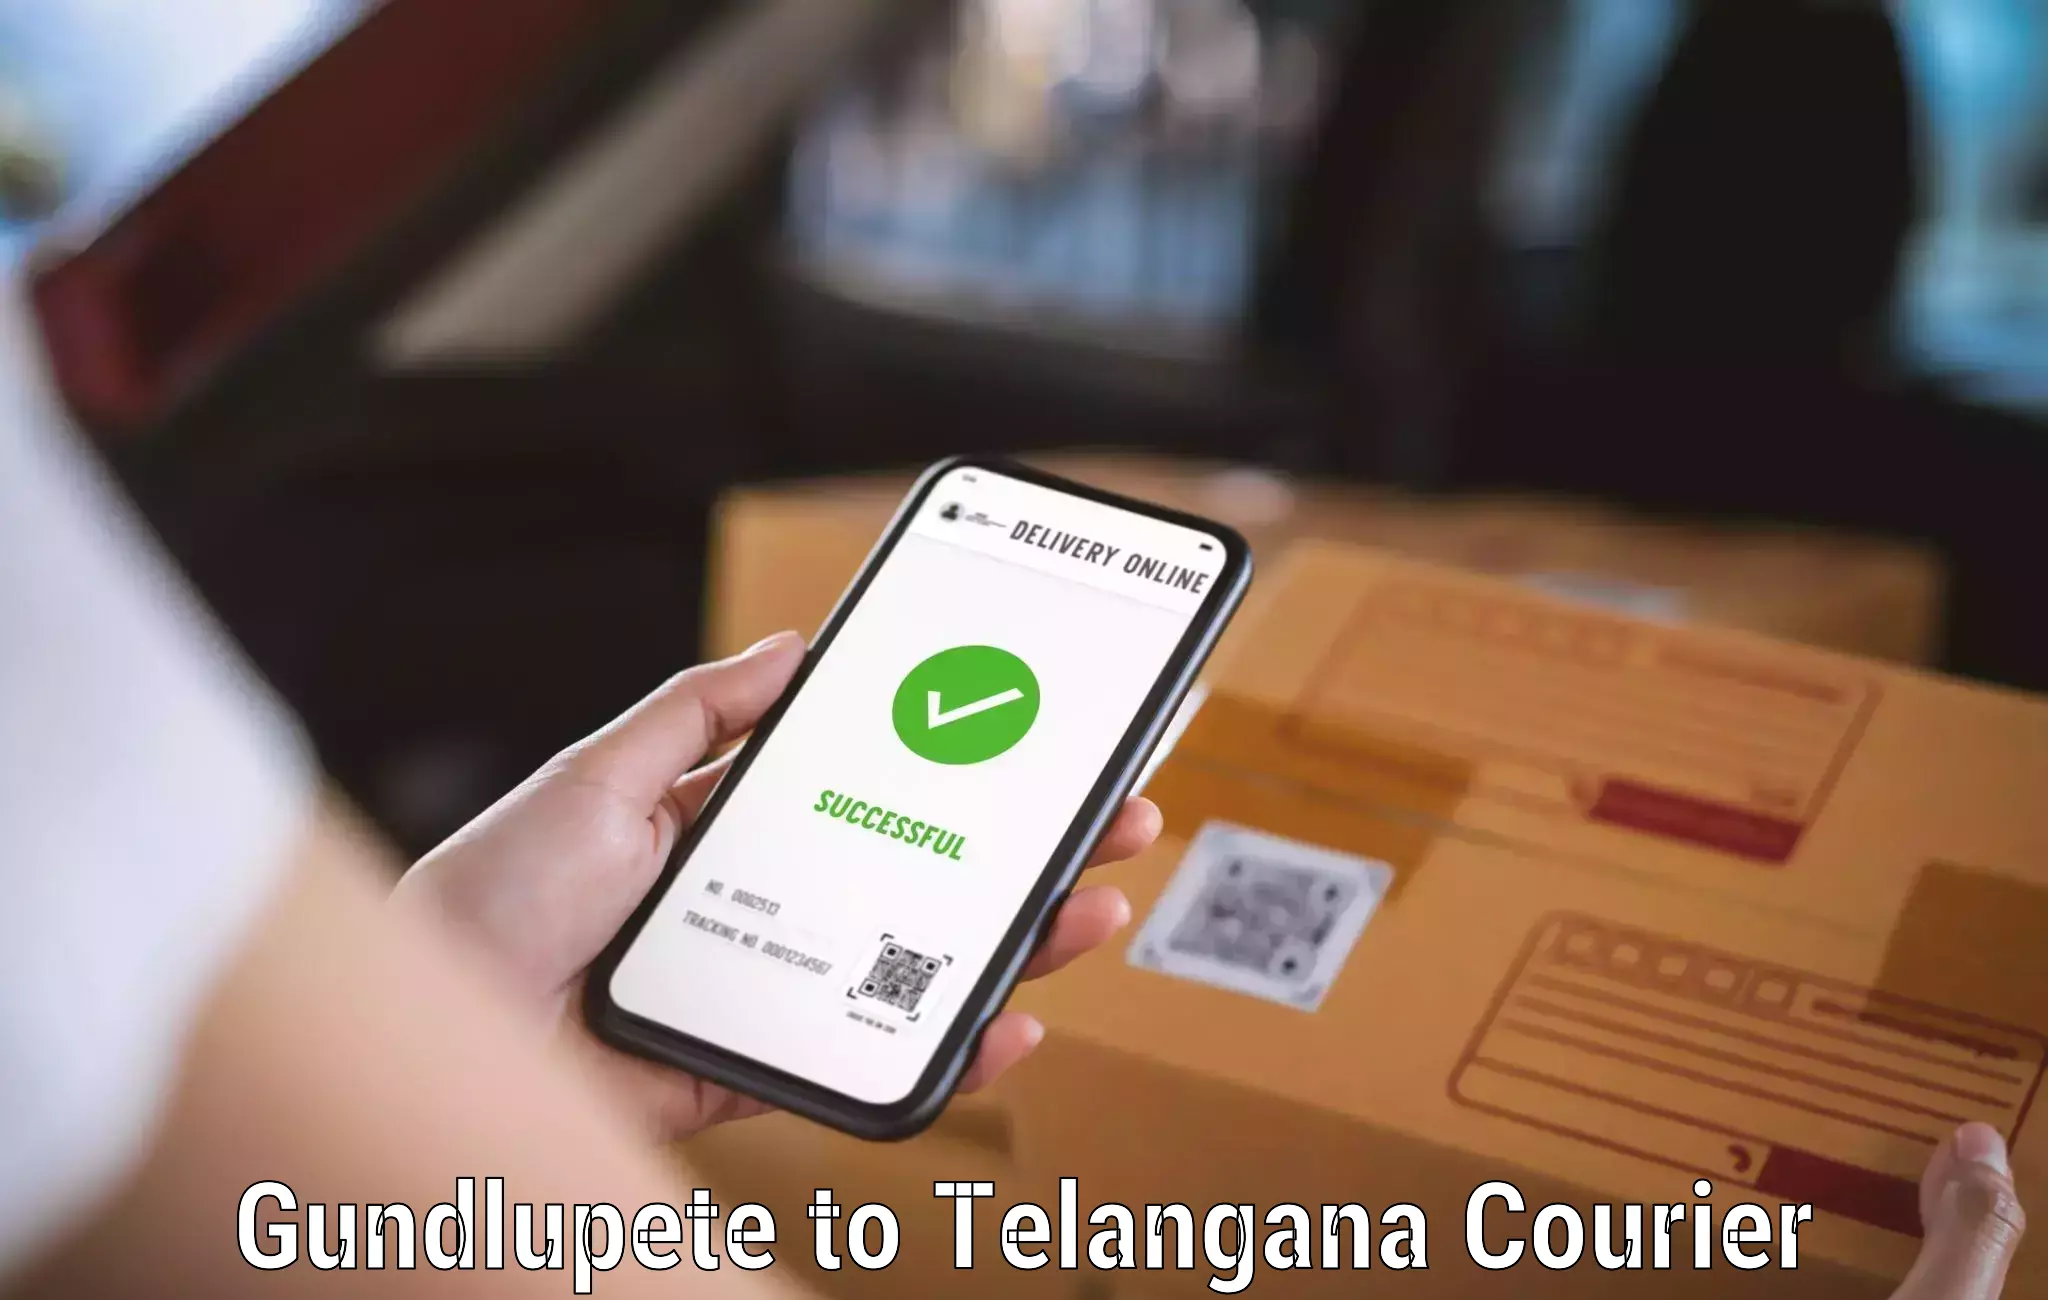 Courier service innovation Gundlupete to Sangareddy